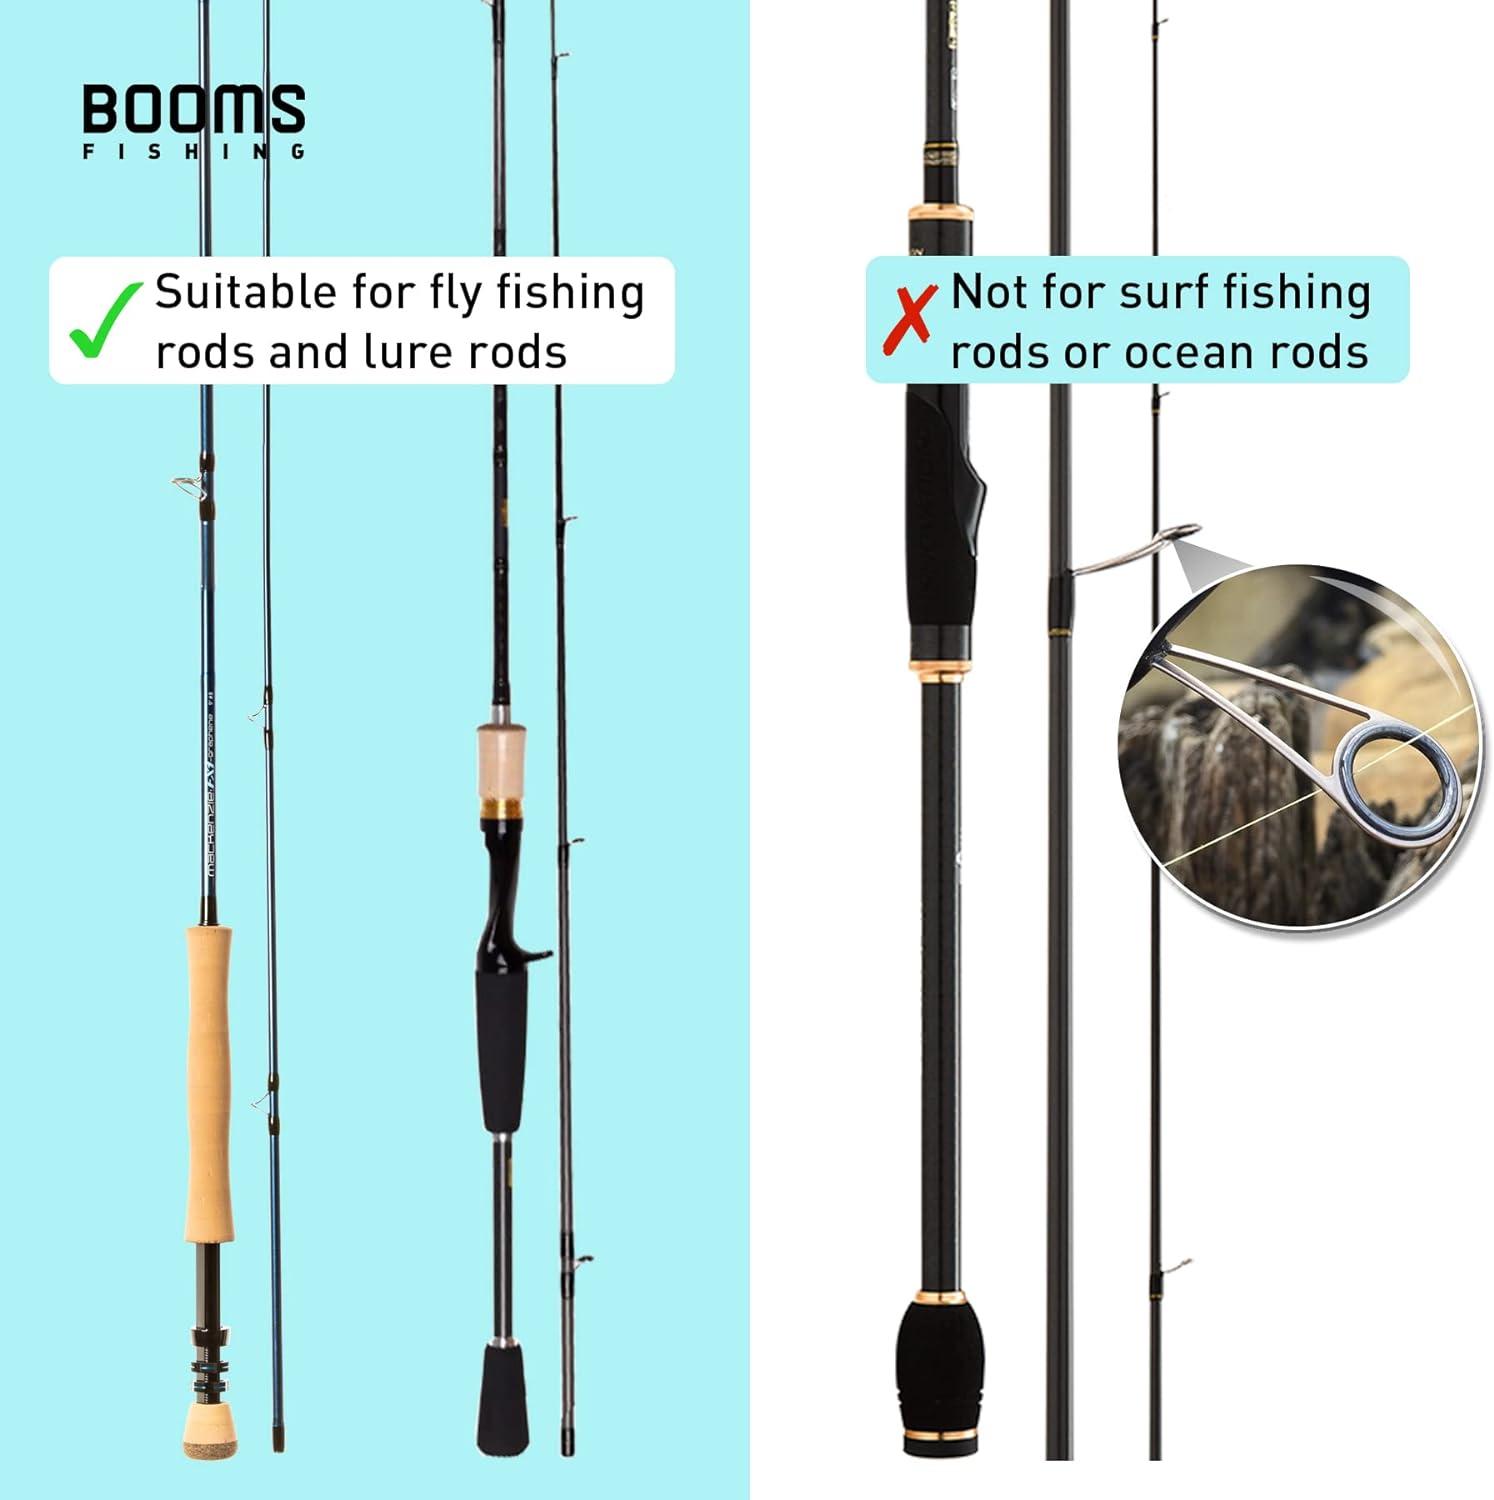 Booms Fishing PB3/PB4 Fishing Rod Case Portable Folded Fishing Pole Case 0.6 ft Hidden Extended Design Fishing Rod Bag Store Up to 2 3 Fishing Poles or Fishing  Rods with Reels 5 Styles